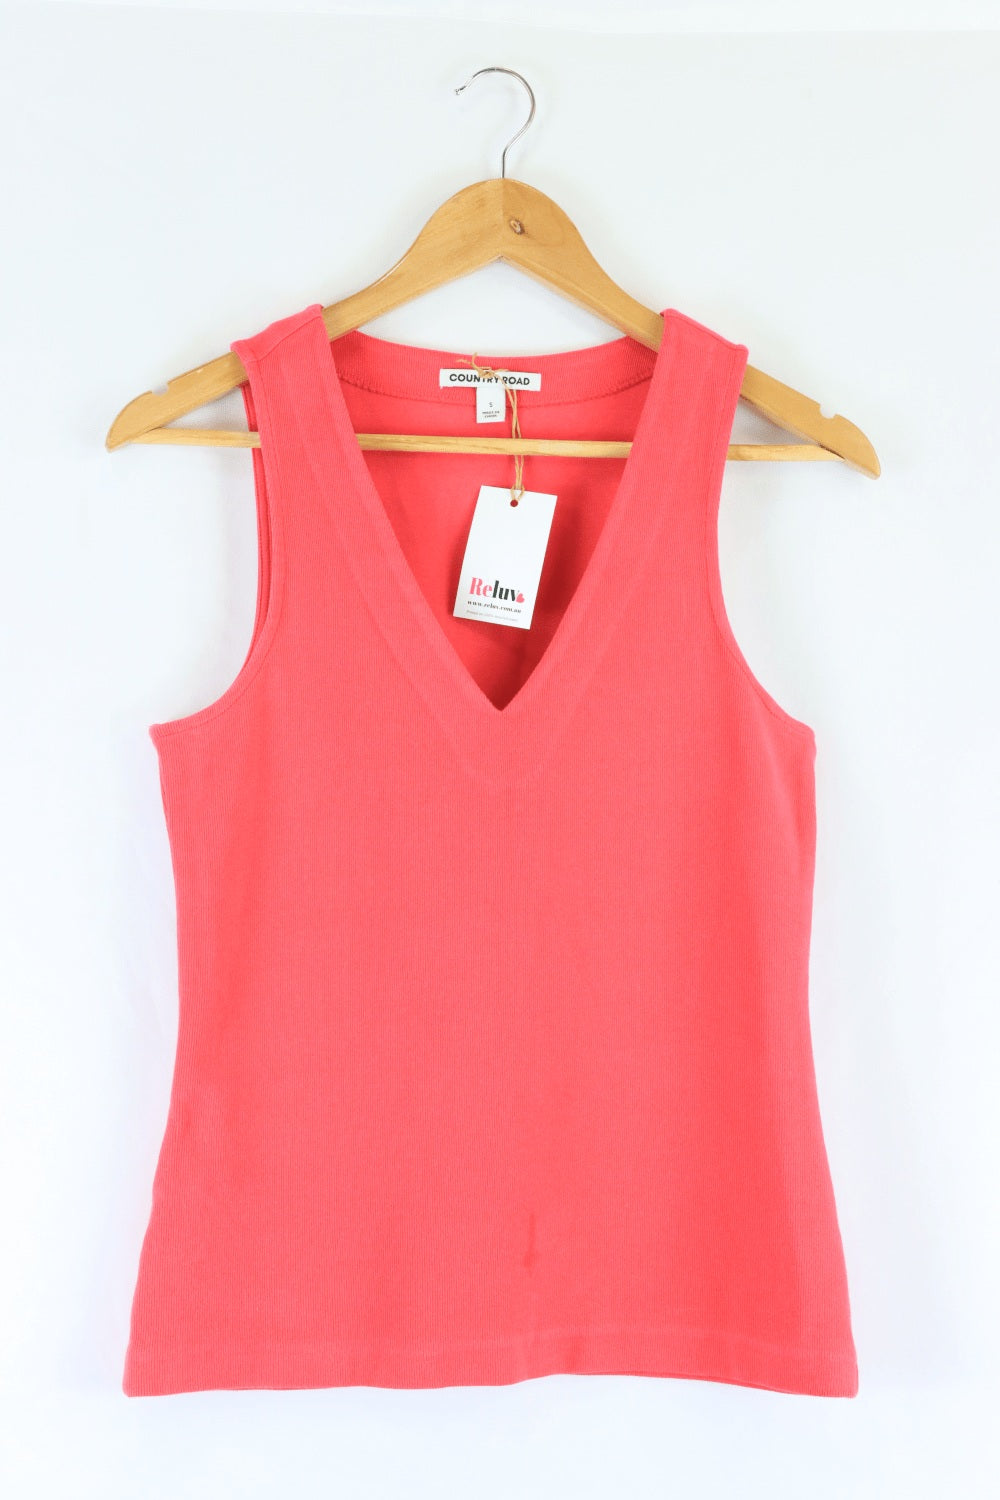 Country Road Pink Singlet S